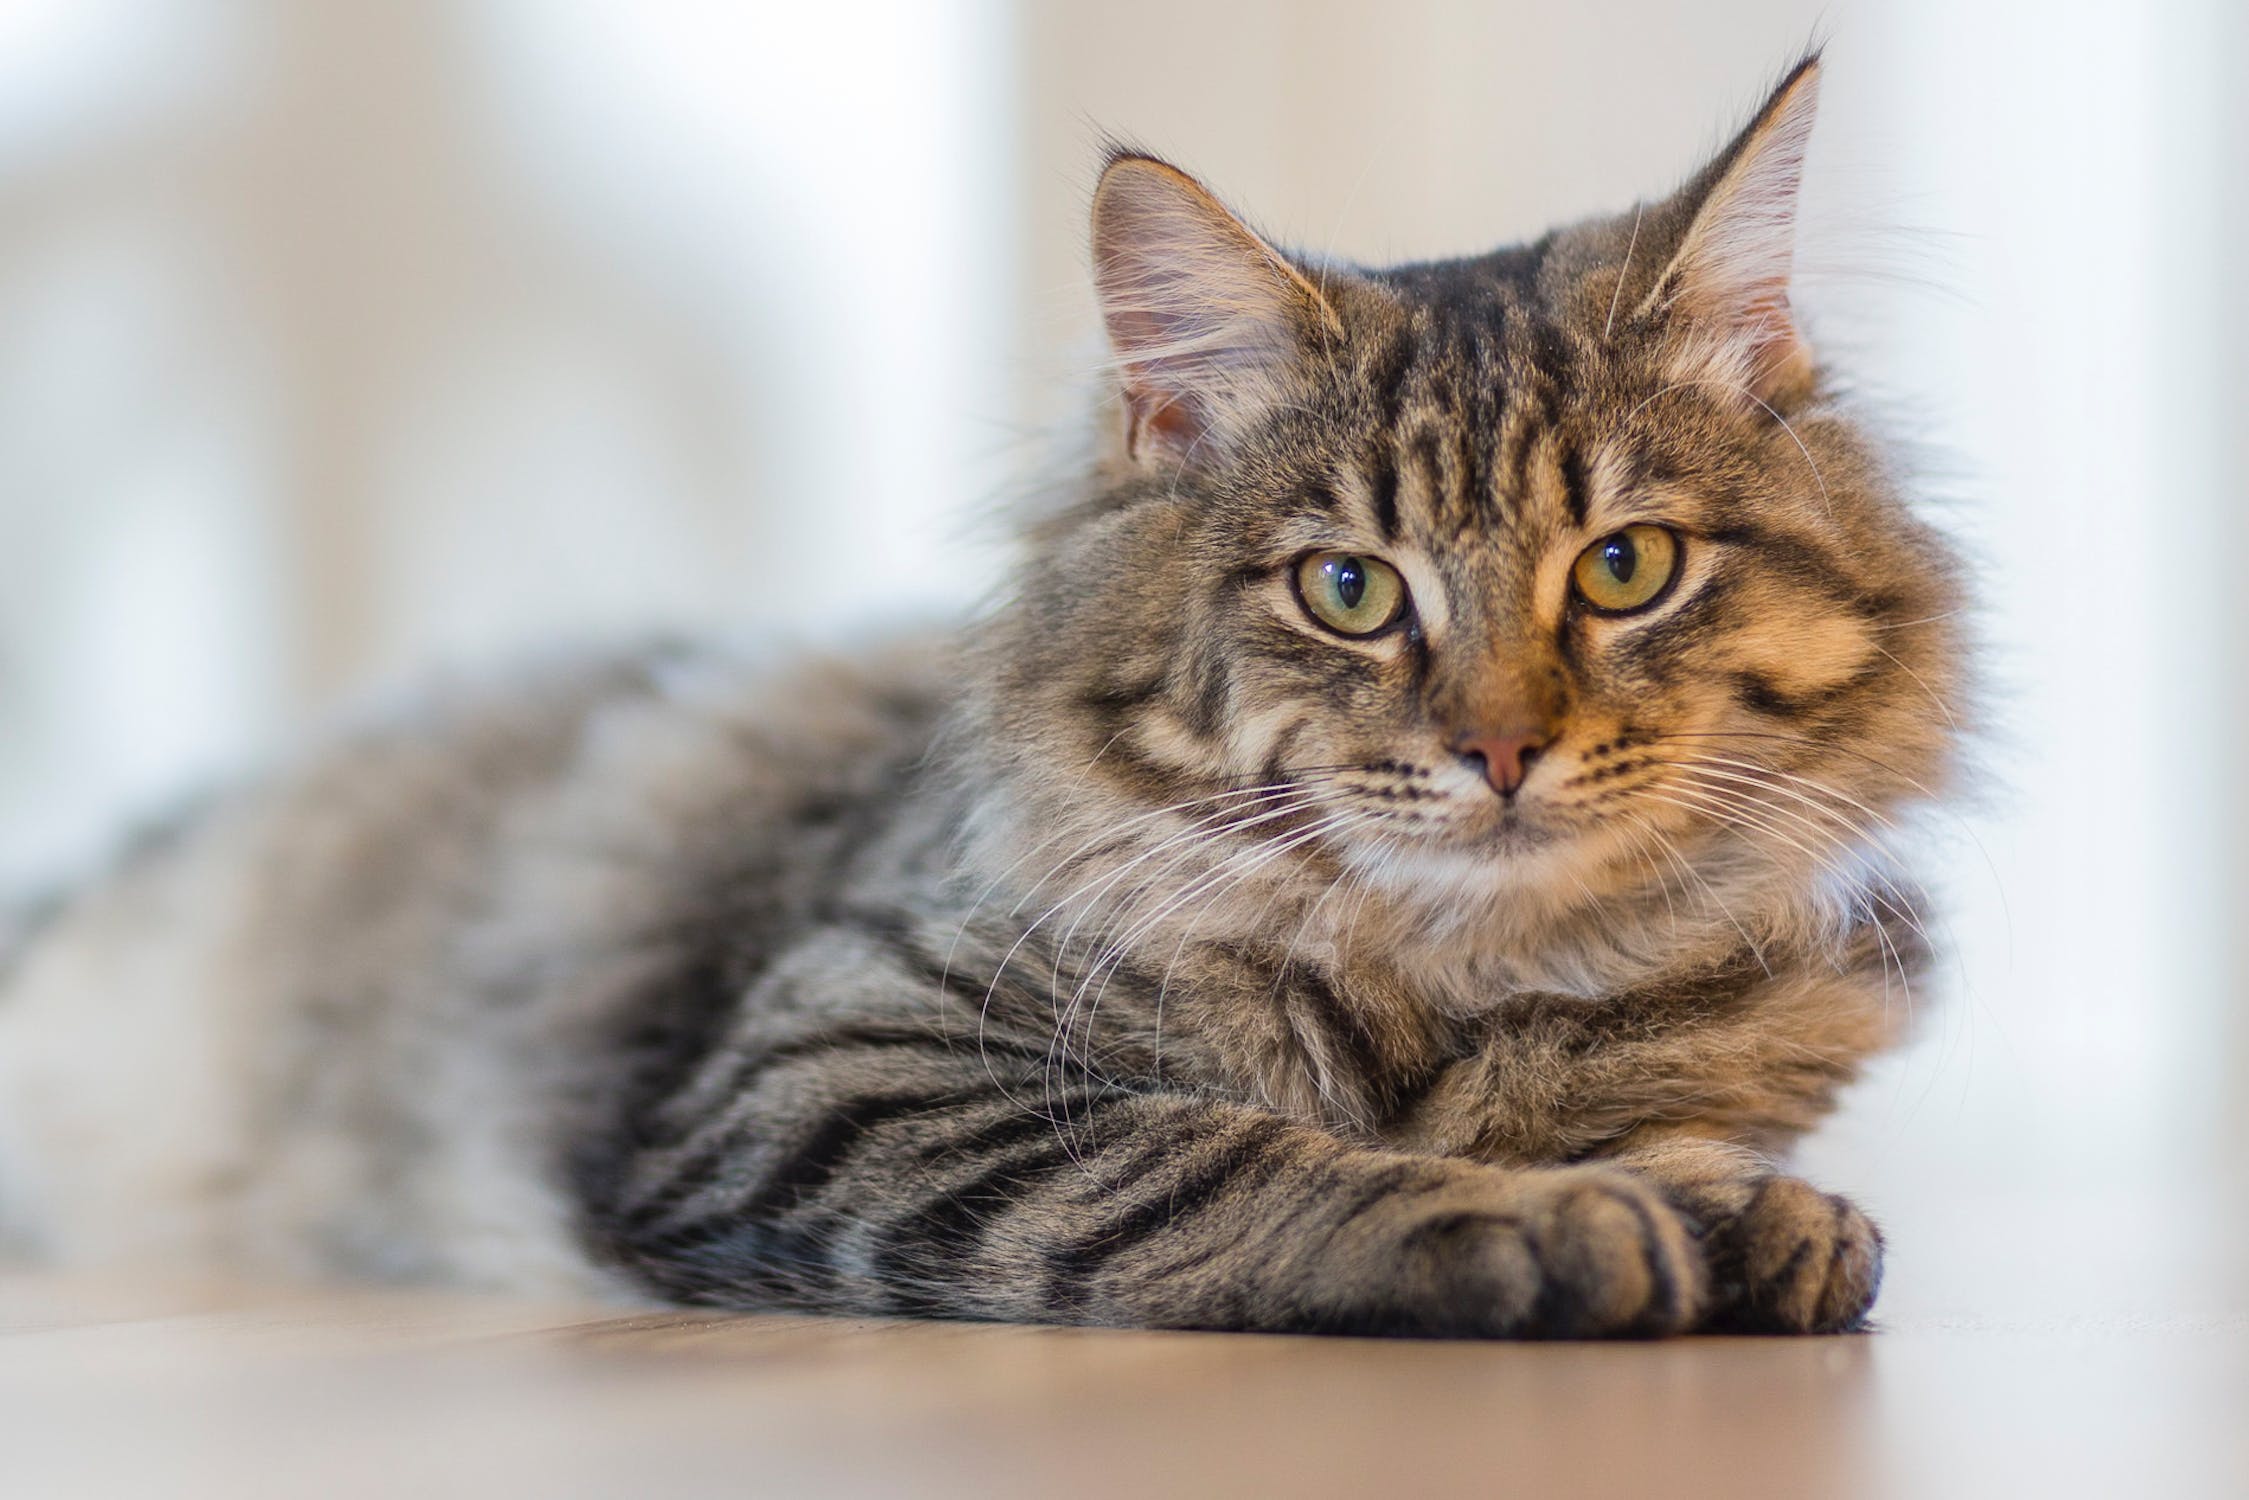 How Animal Rescue Websites Can Benefit From Using An API For Cat Breed Recognition